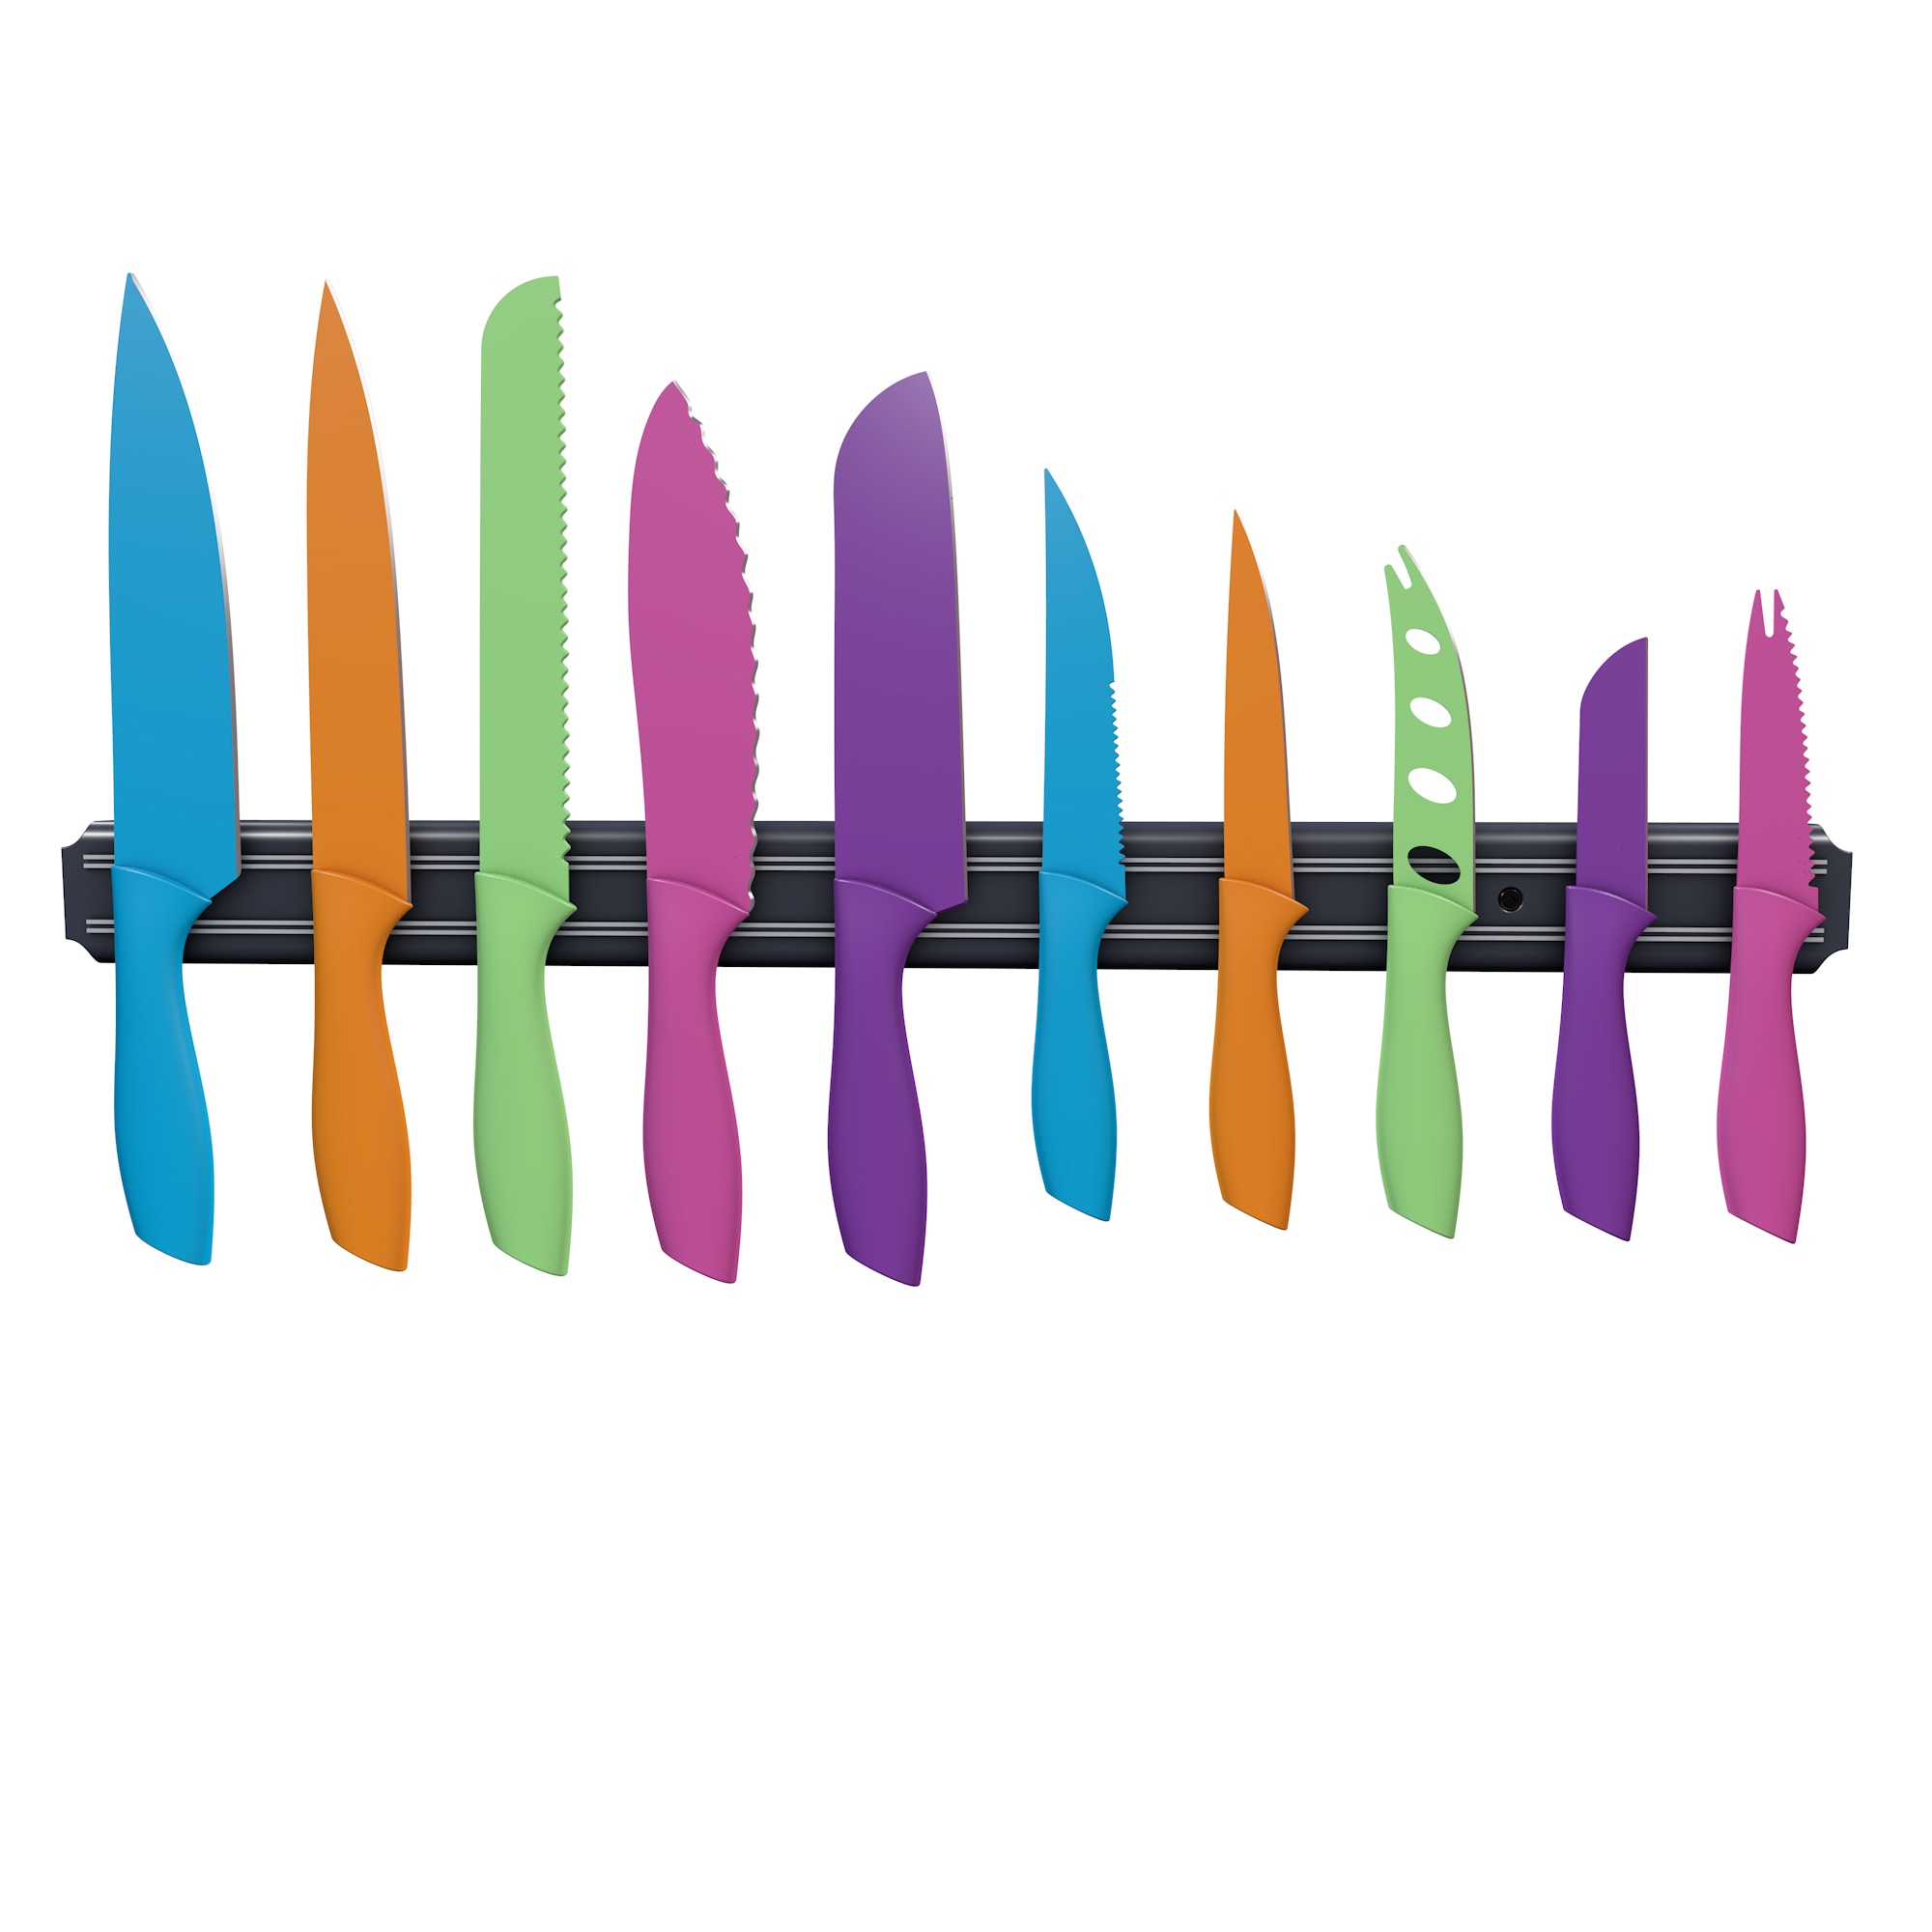 Cuisinart Advantage 12-Piece Color Knife Set with 13-In. Semi